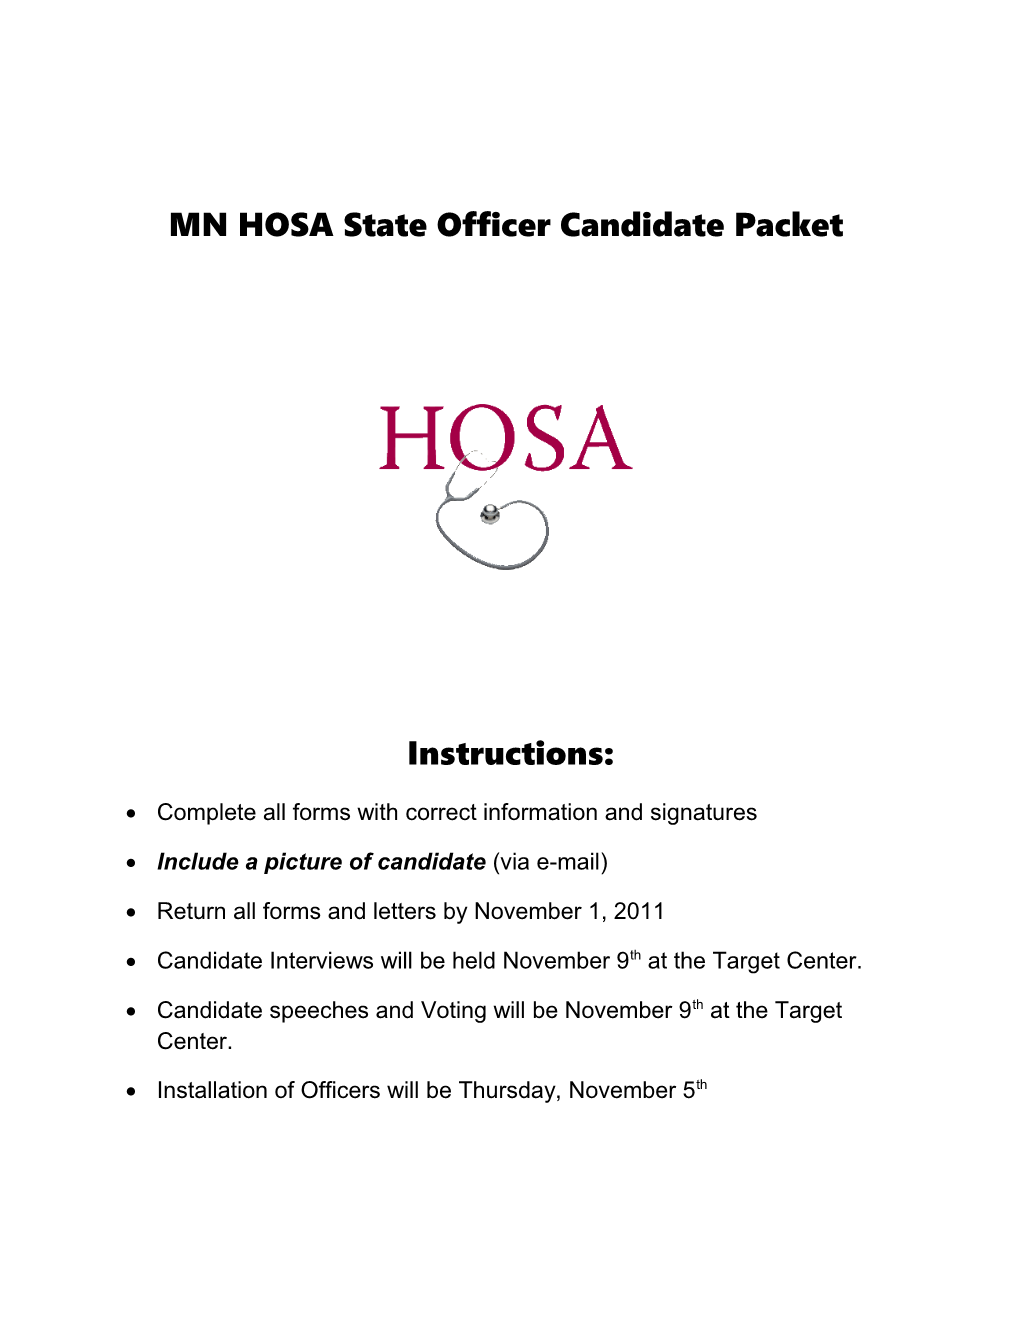 MN HOSA State Officer Candidate Packet